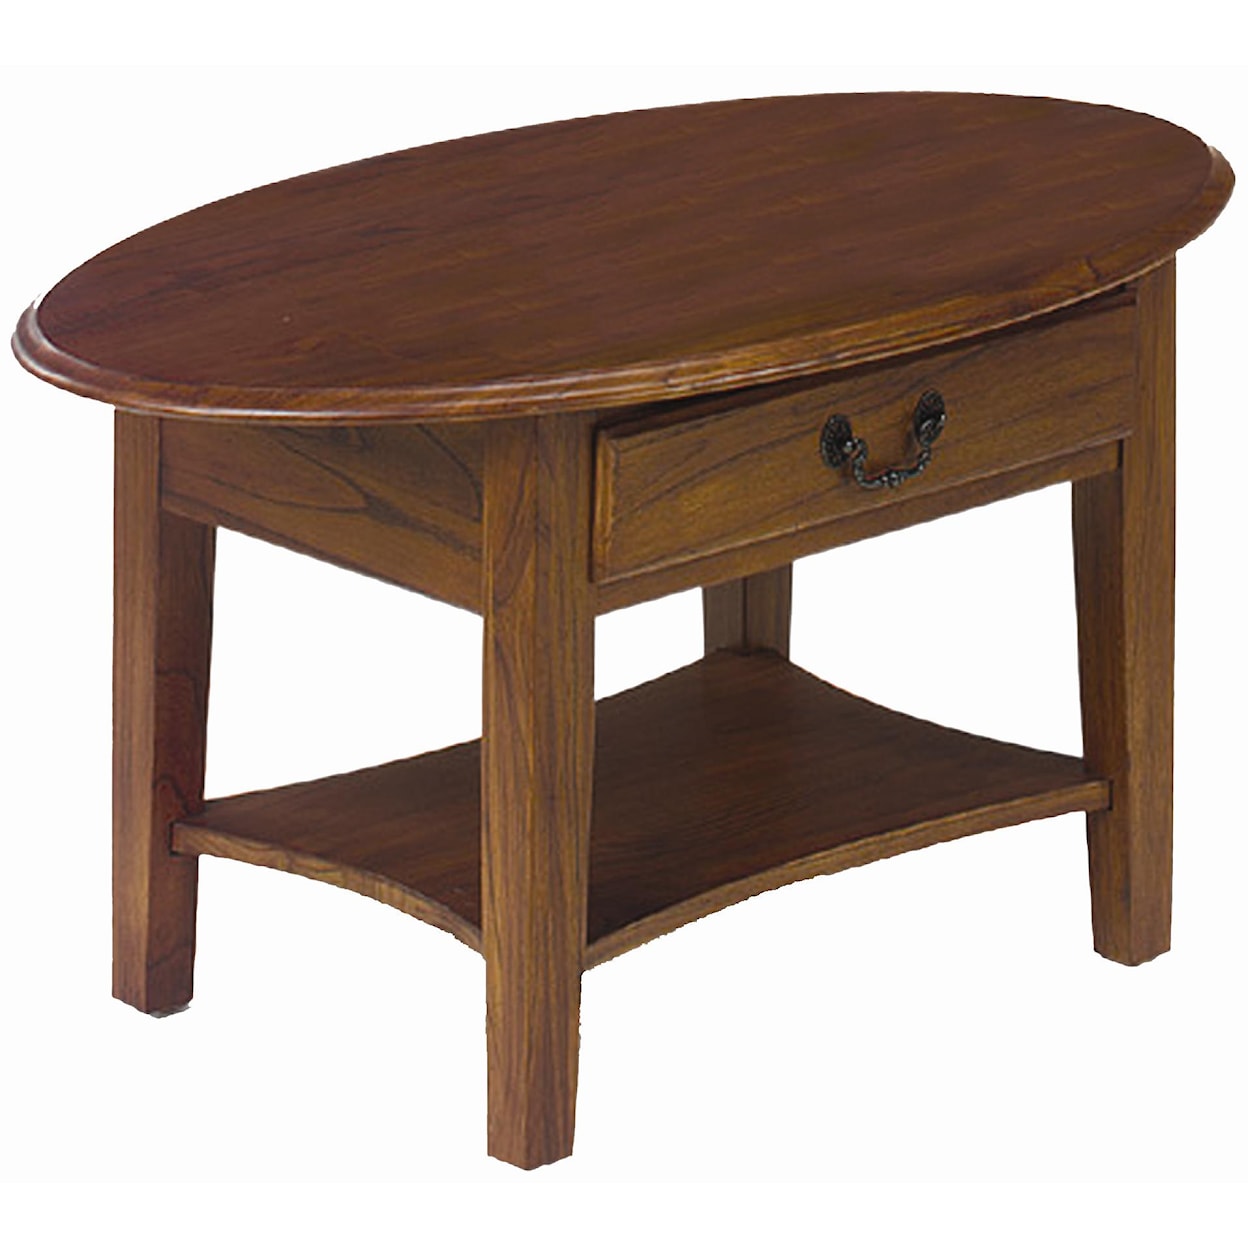 Leick Furniture Favorite Finds Oval Coffee Table